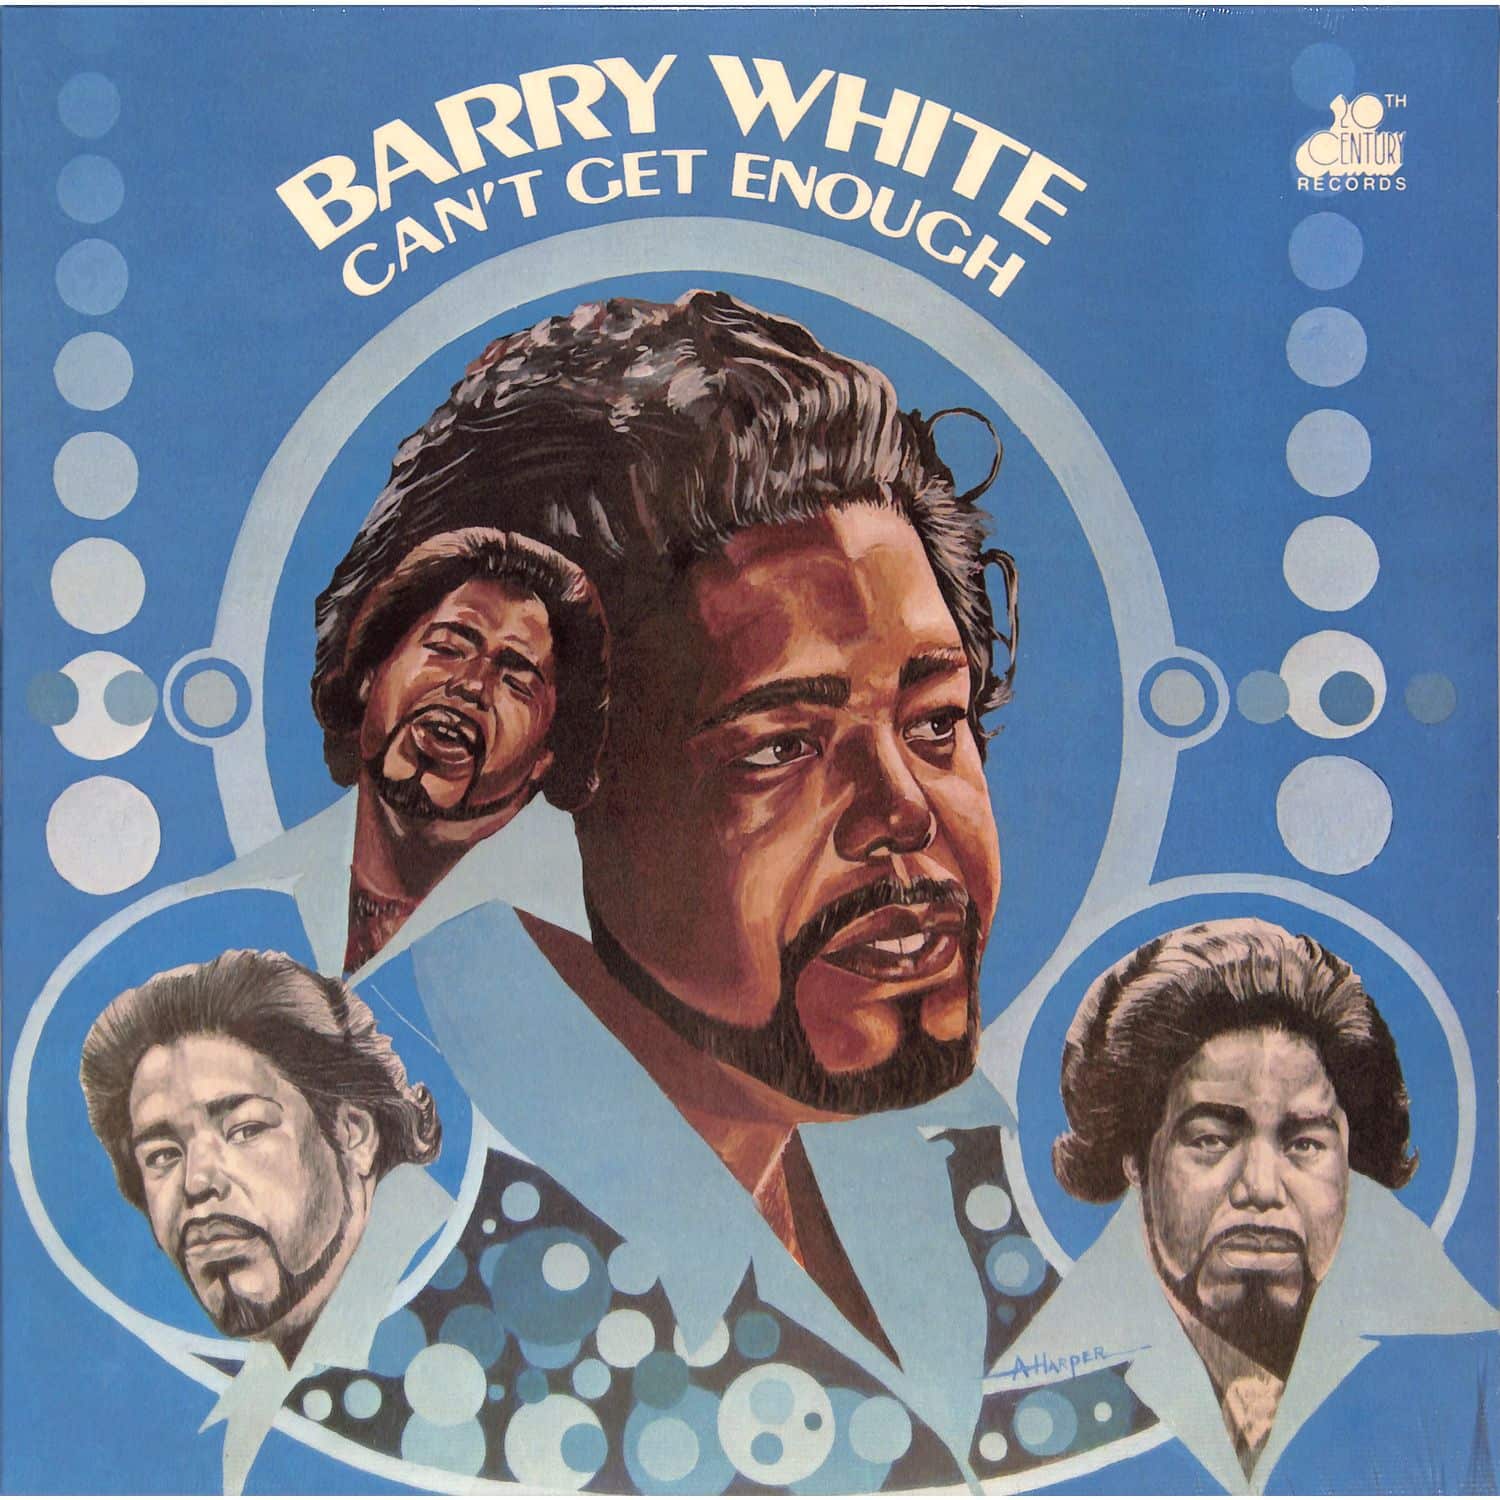 Barry White - CANT GET ENOUGH 